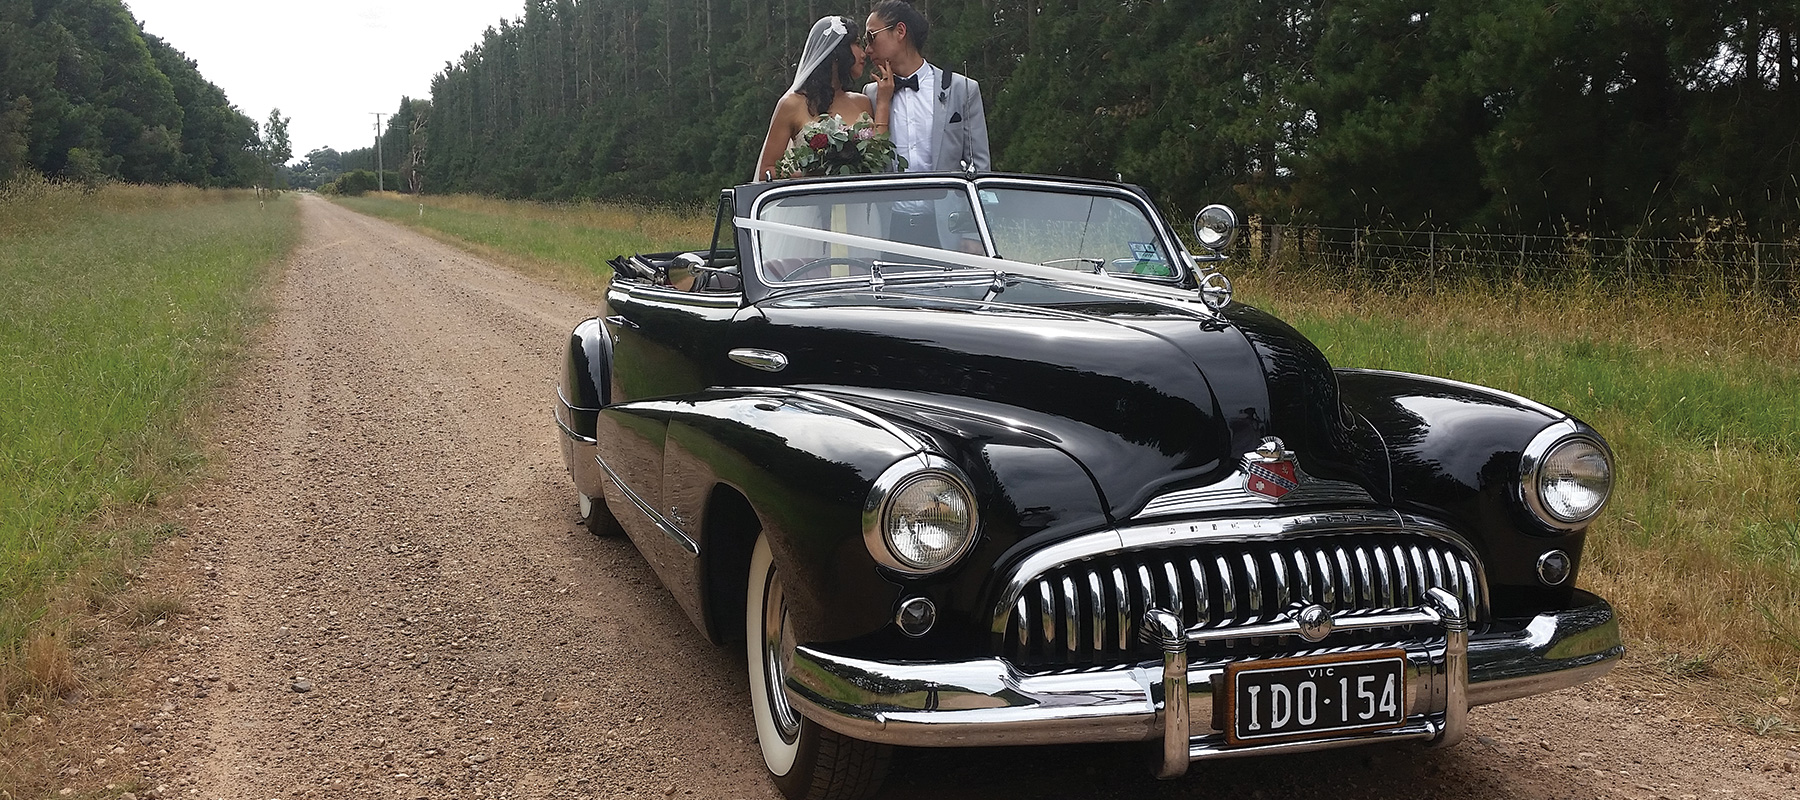 About Black Buick Wedding Cars Melbourne